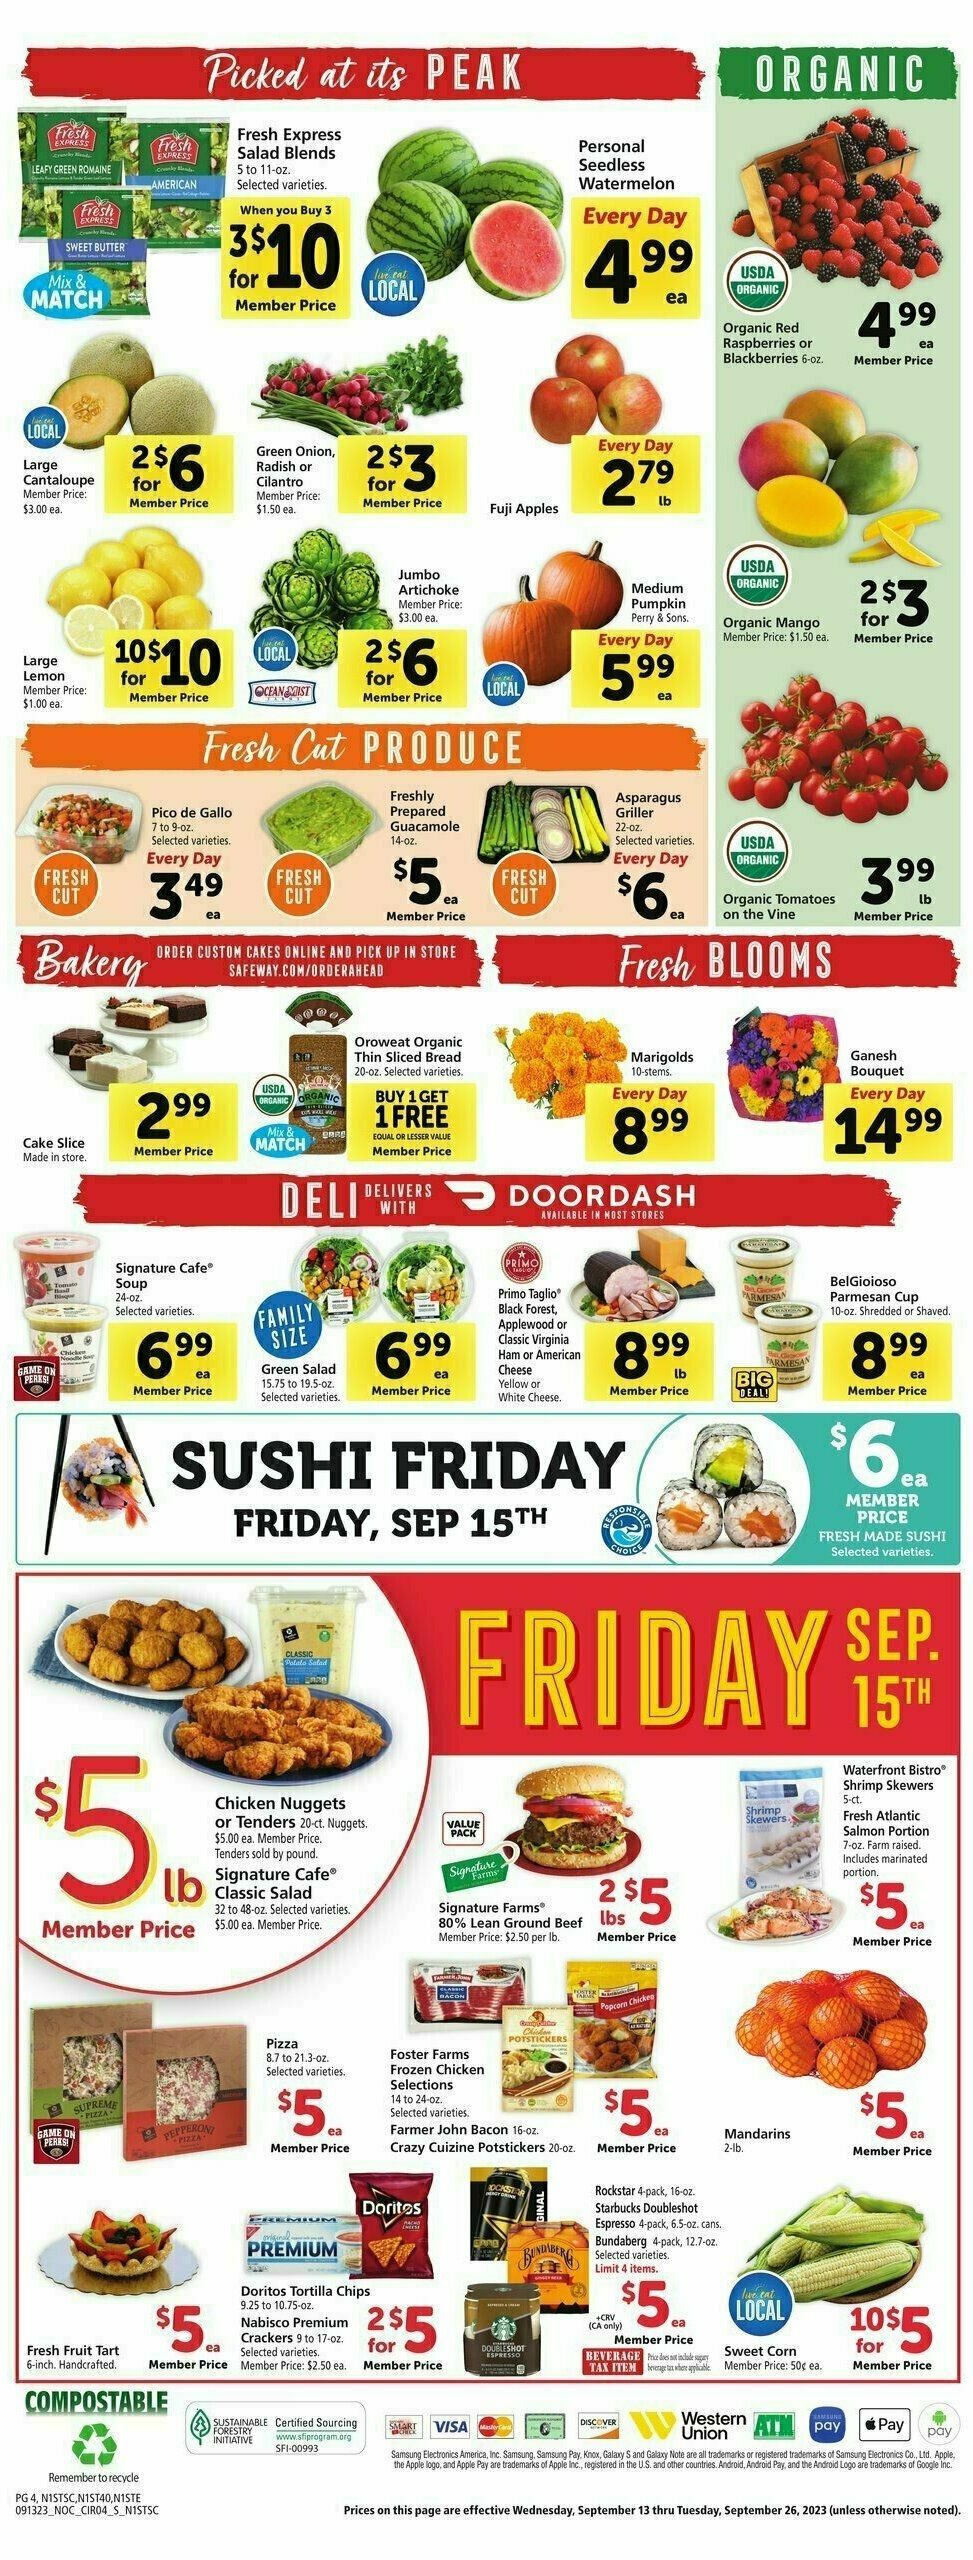 Safeway Weekly Ad from September 13